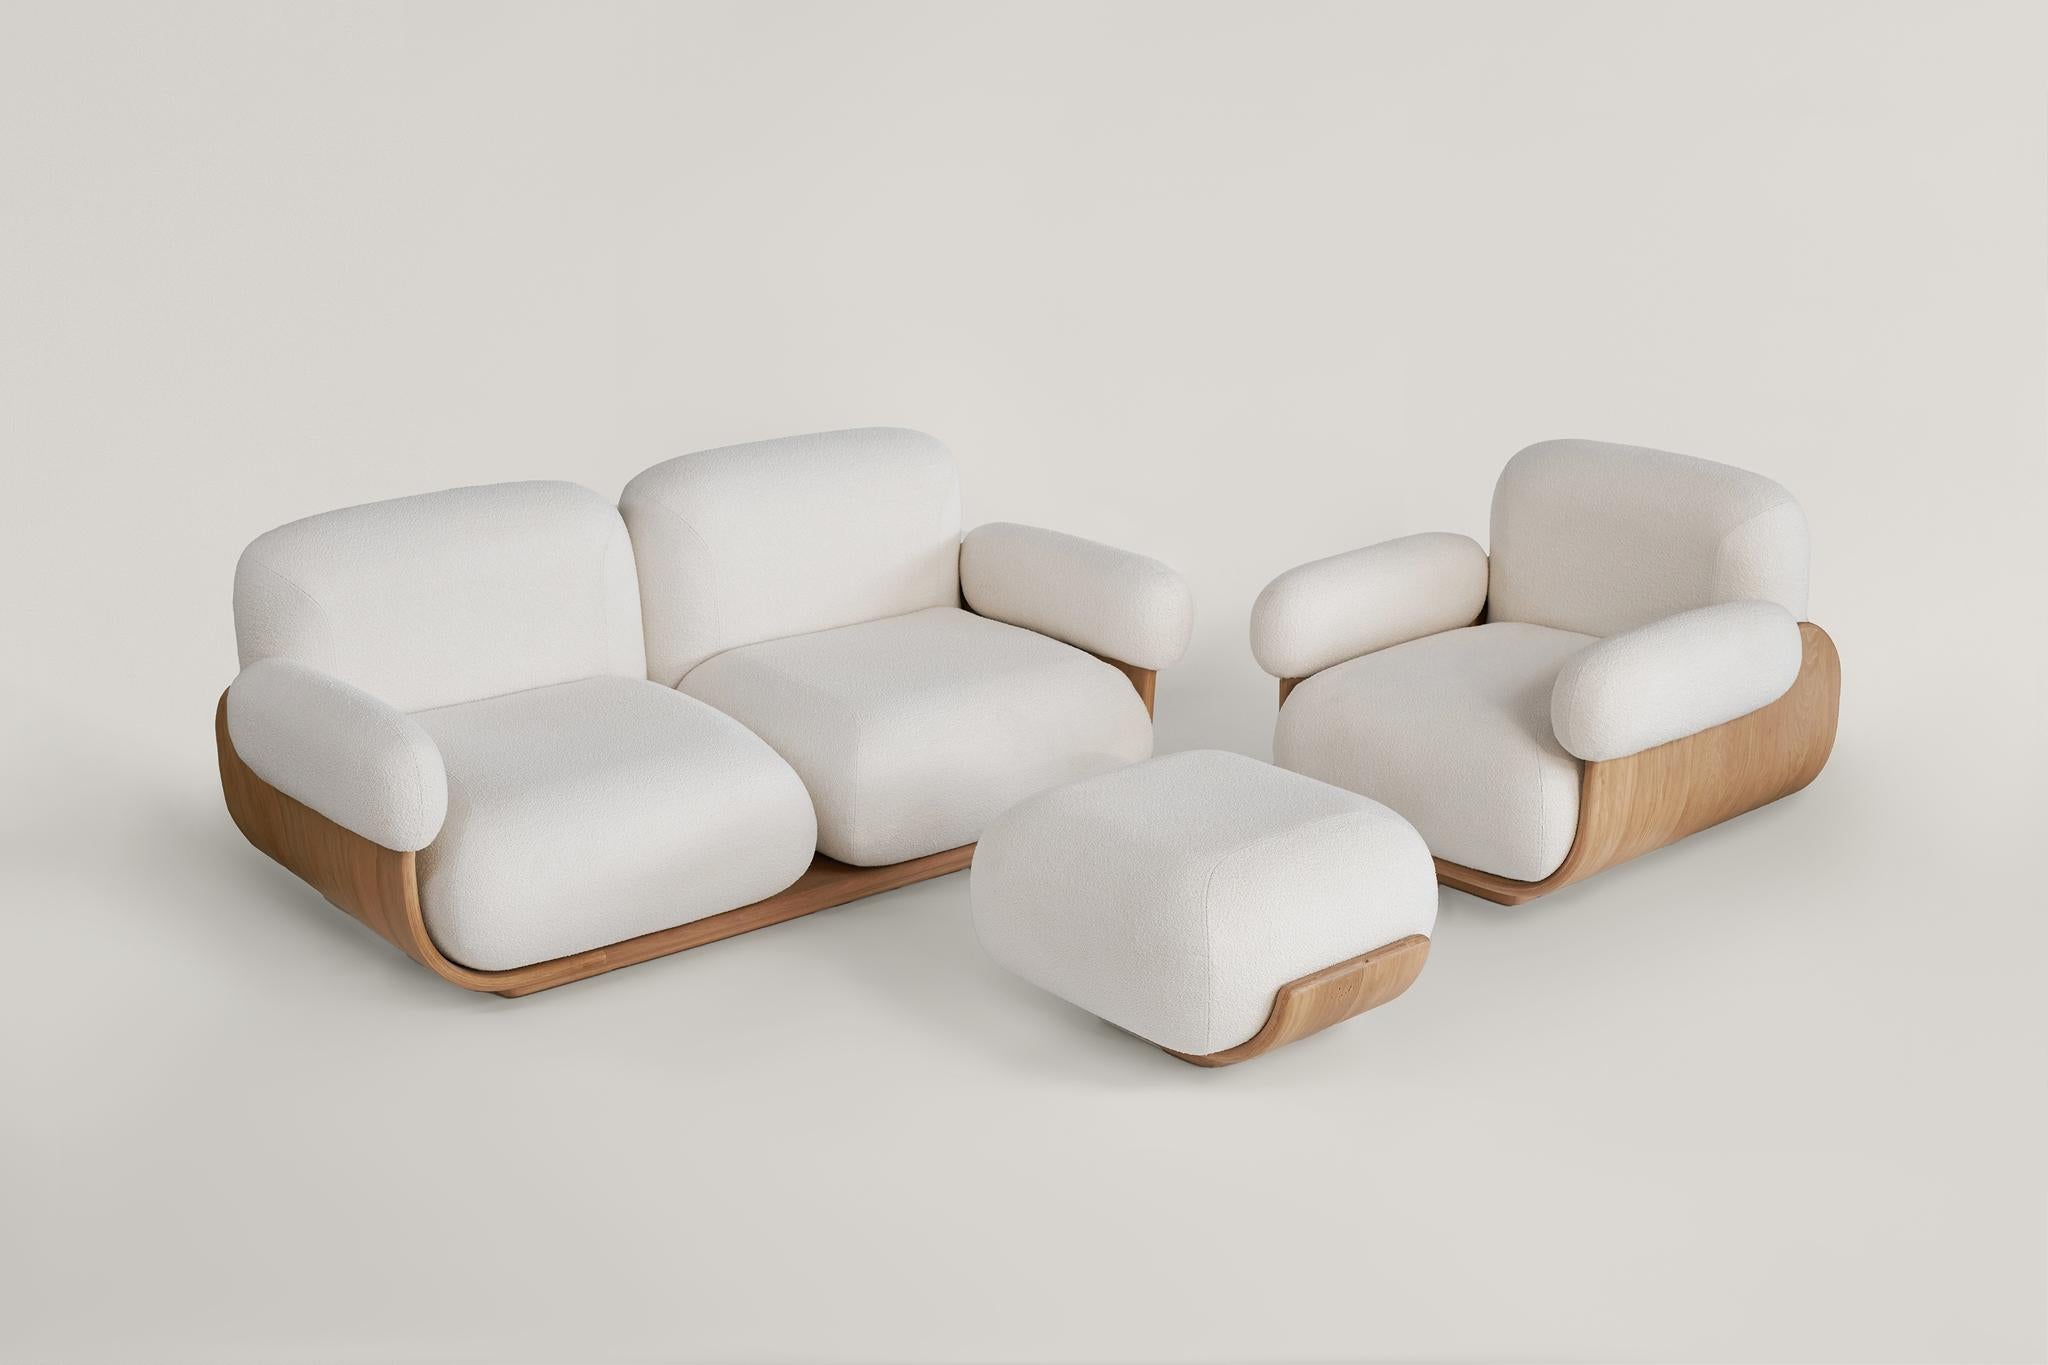 Contemporary Cannoli Sofa by Studio Phat x Arbore 'Bent Hardwood Structure' For Sale